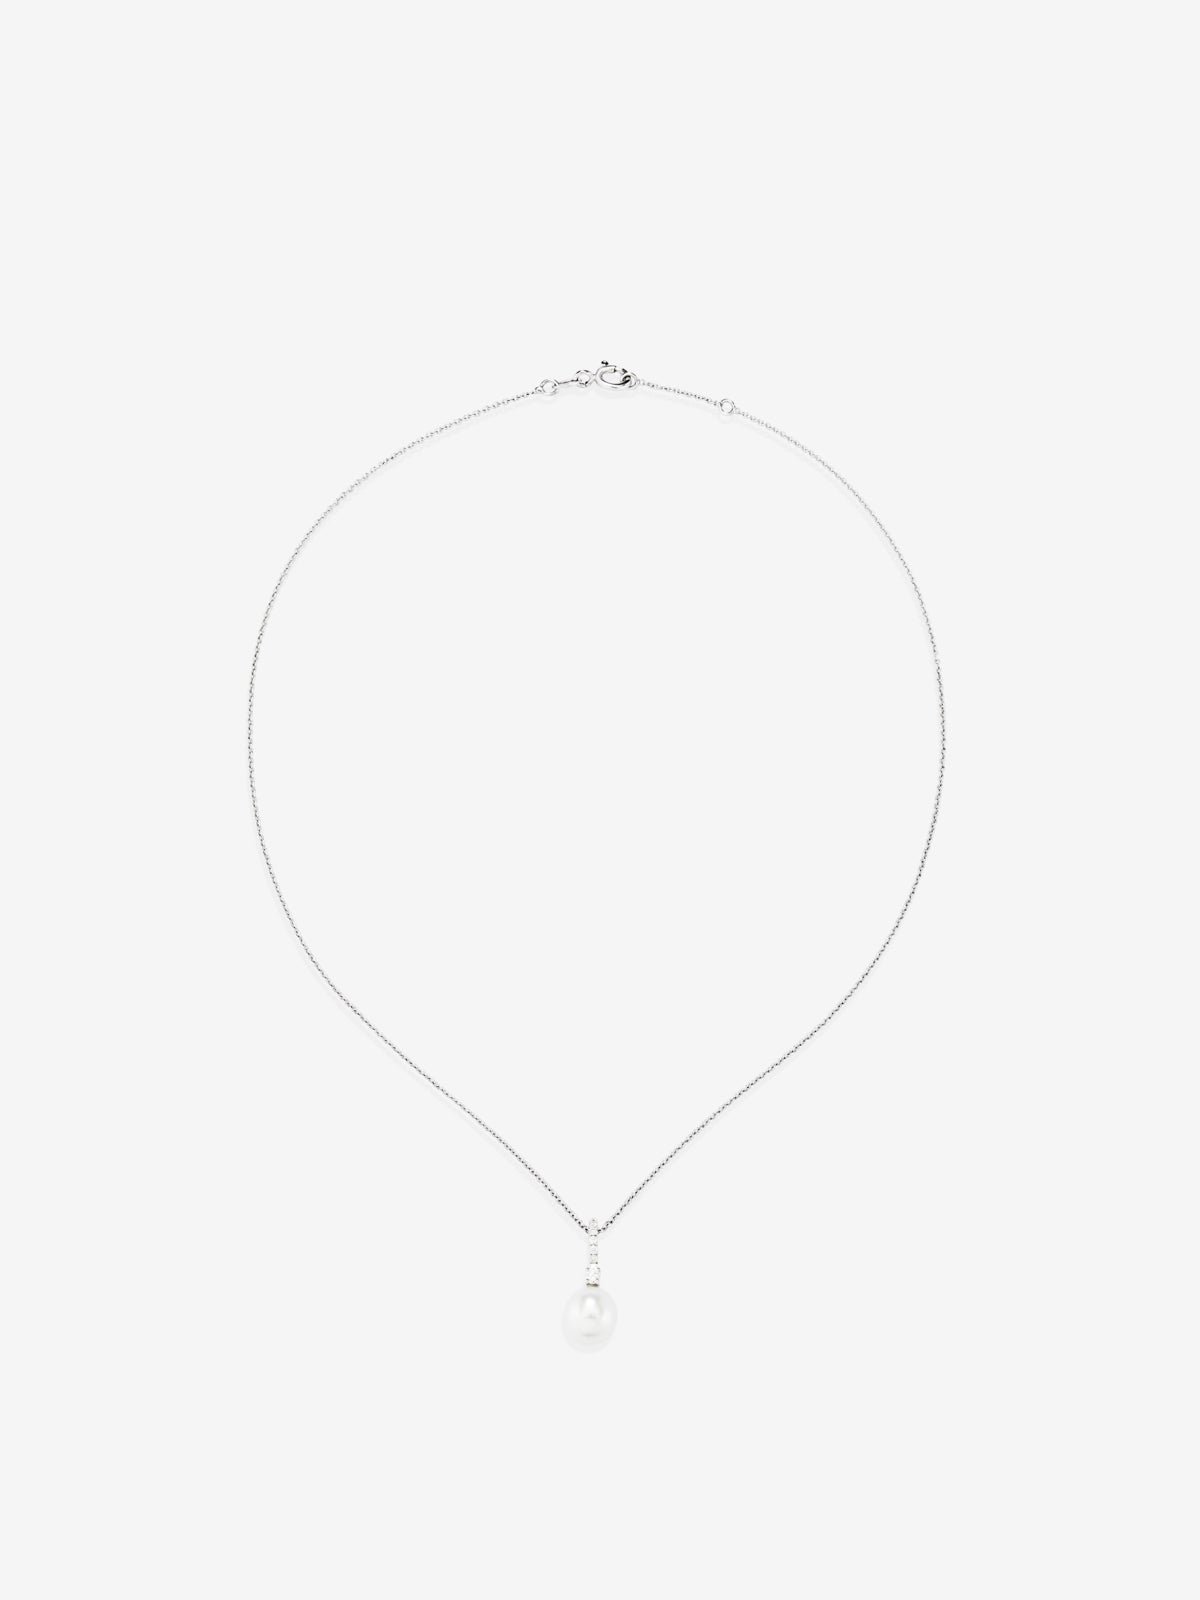 18k white gold chain pendant with diamond hoop and 8.5 mm Australian pearl